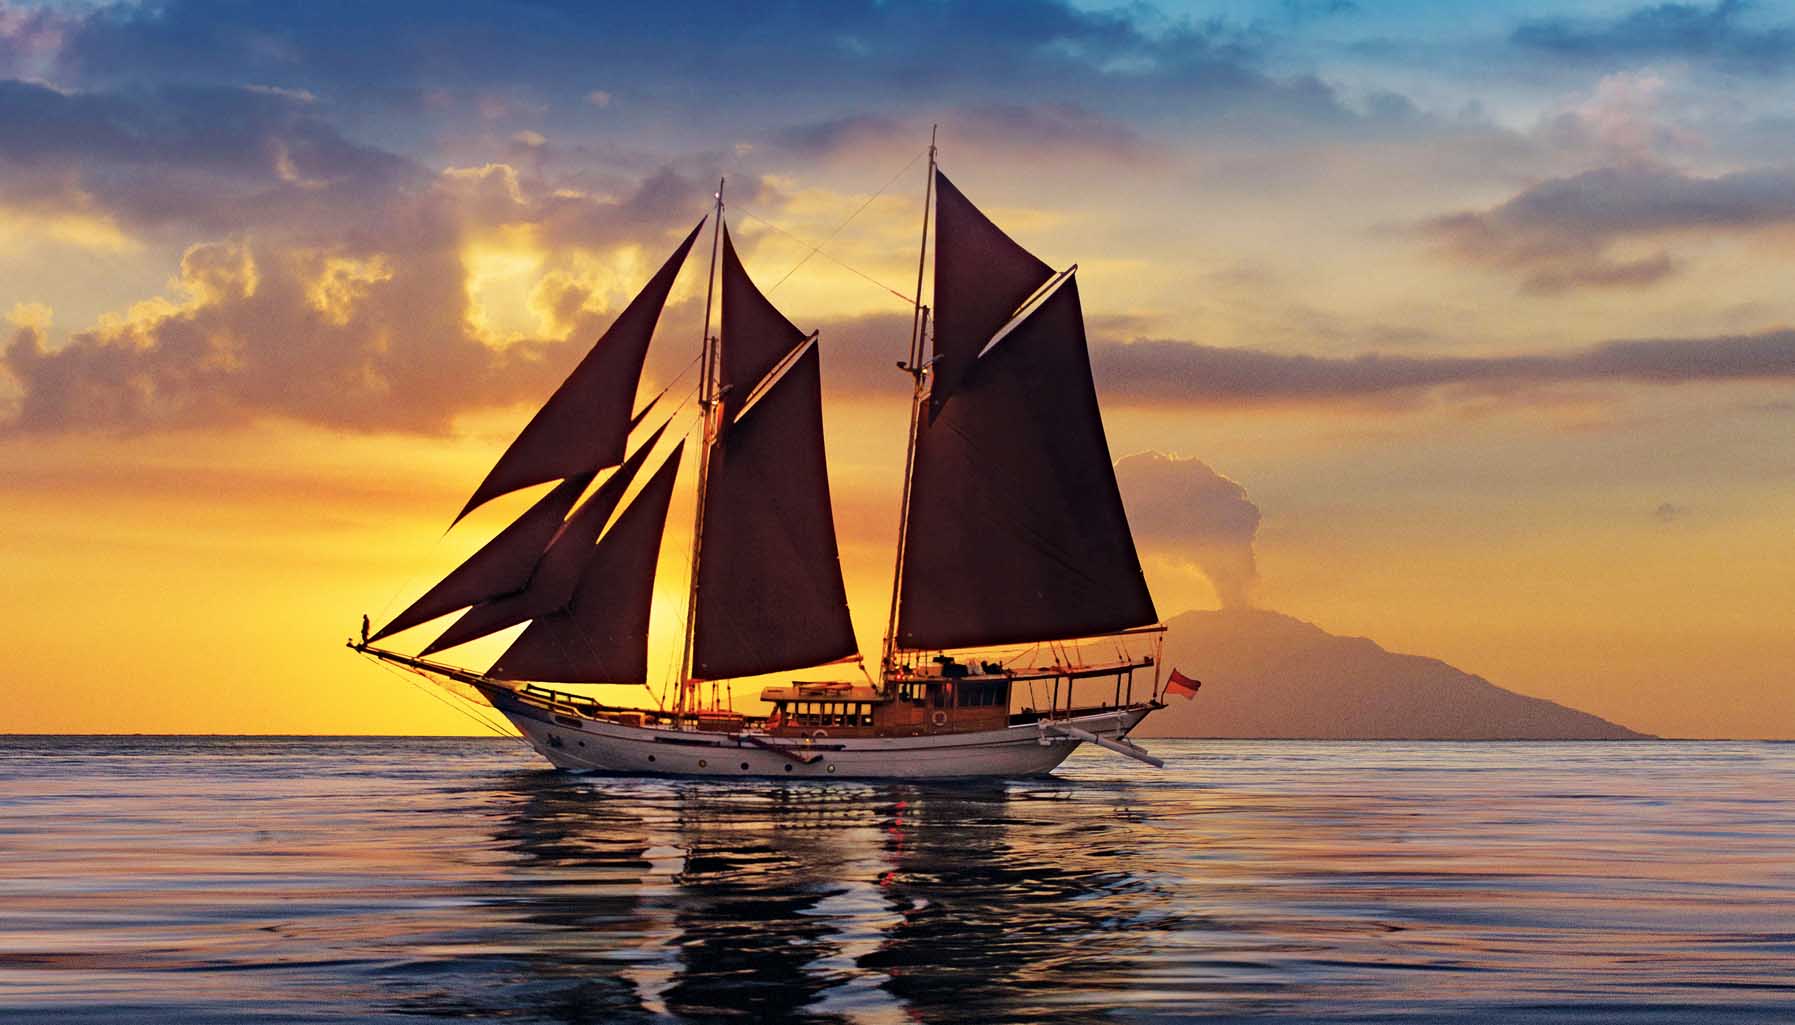 Catch the trade winds in your sails. Explore. Dream. Discover 